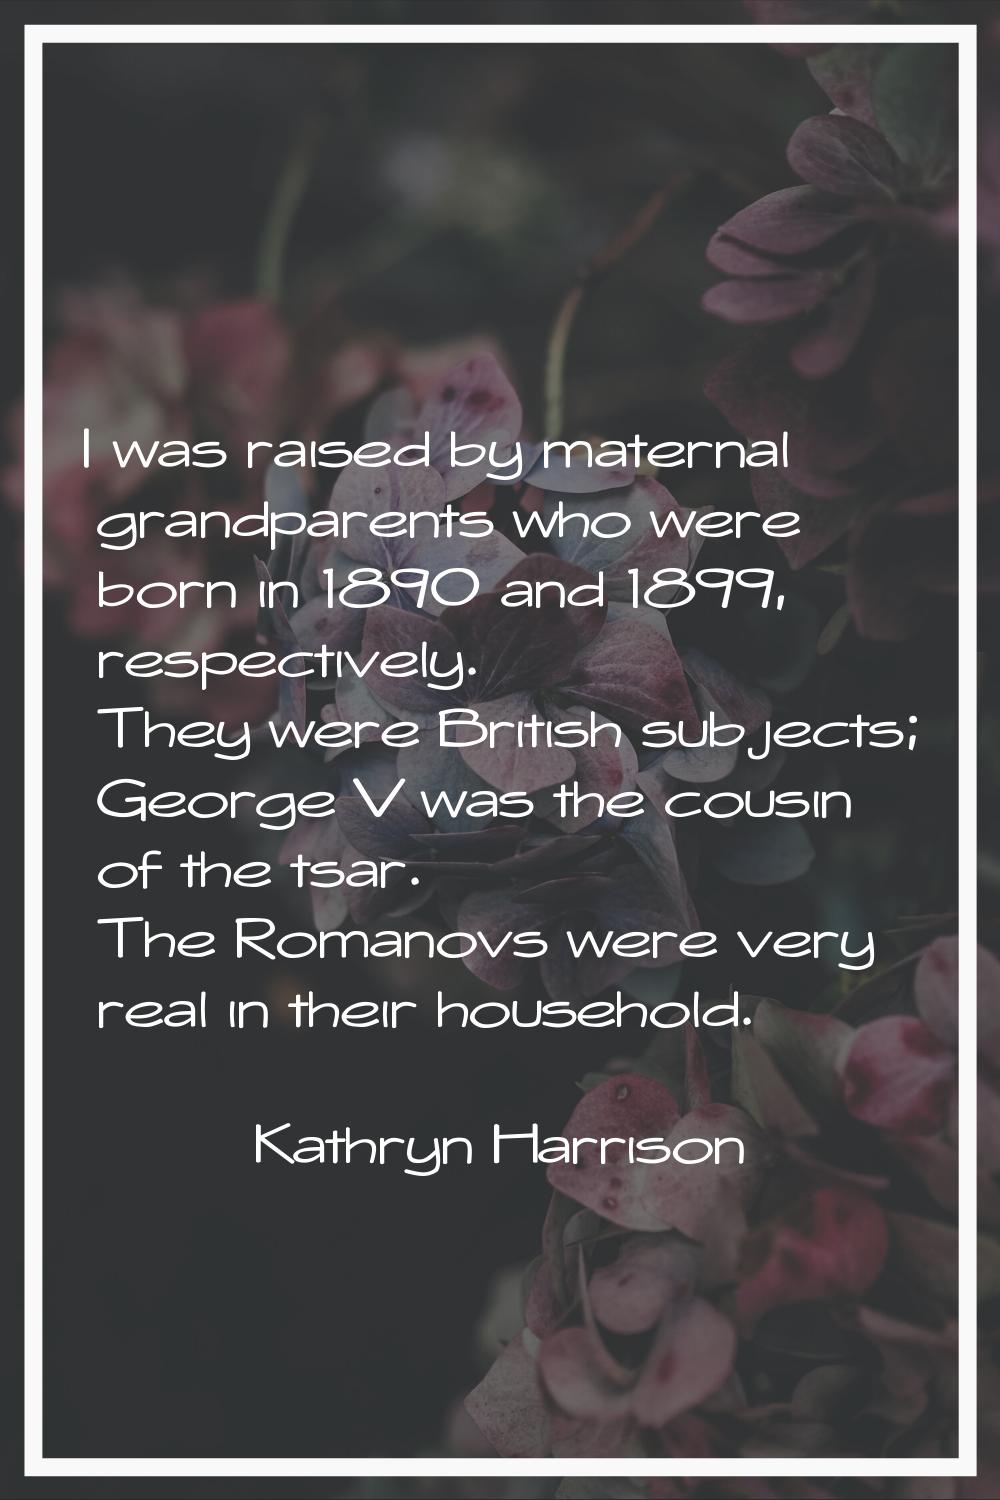 I was raised by maternal grandparents who were born in 1890 and 1899, respectively. They were Briti